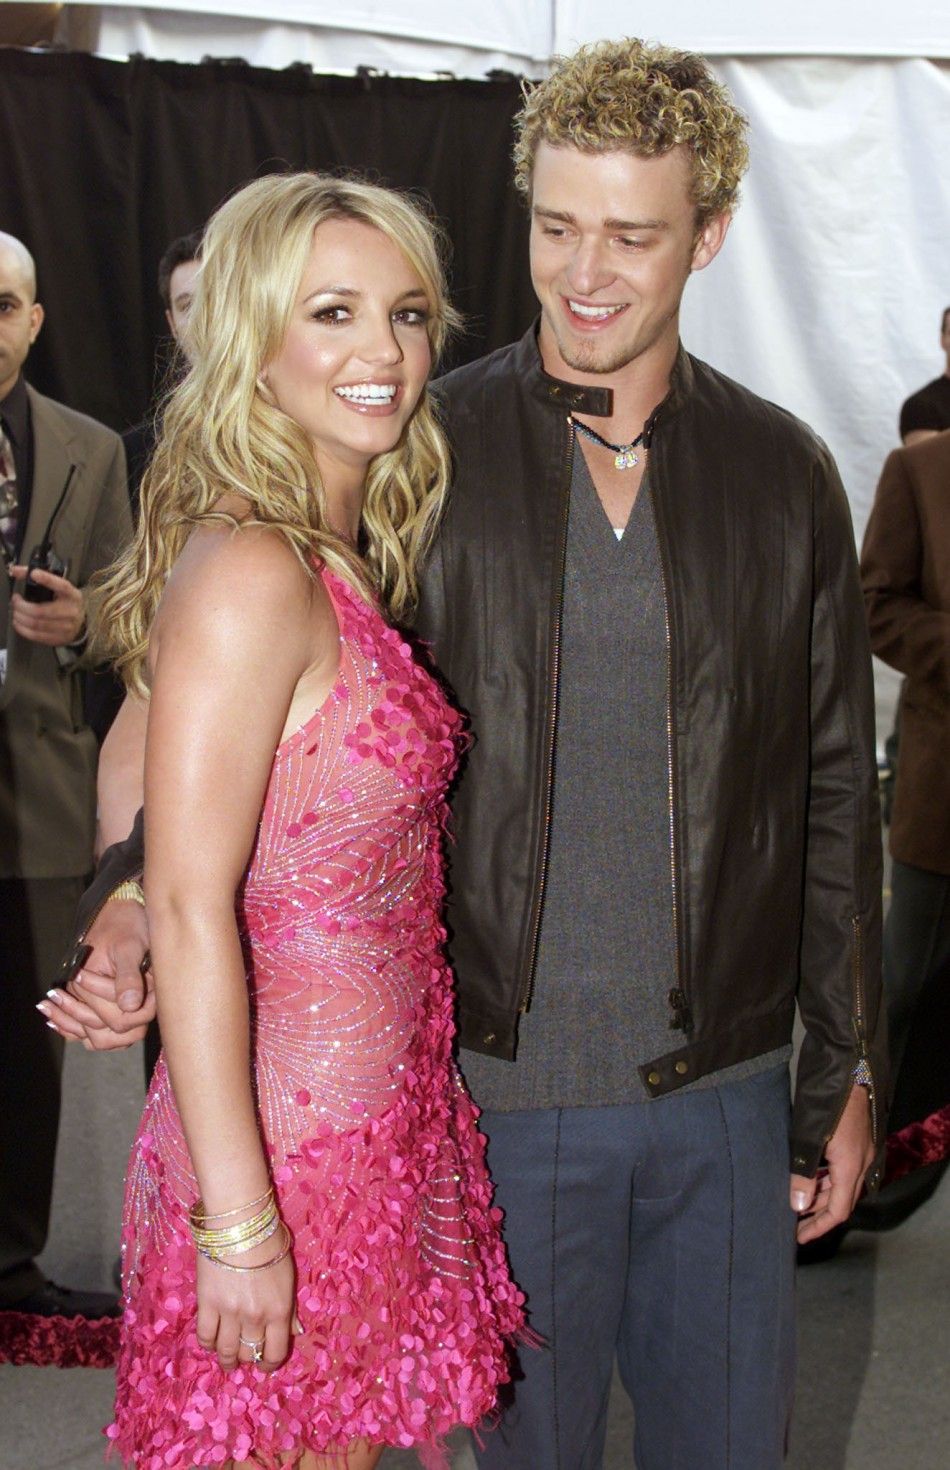 Singer Britney Spears and boyfriend, Justin Timberlake of the group quot039N Syncquot arrive at the 29th ann..